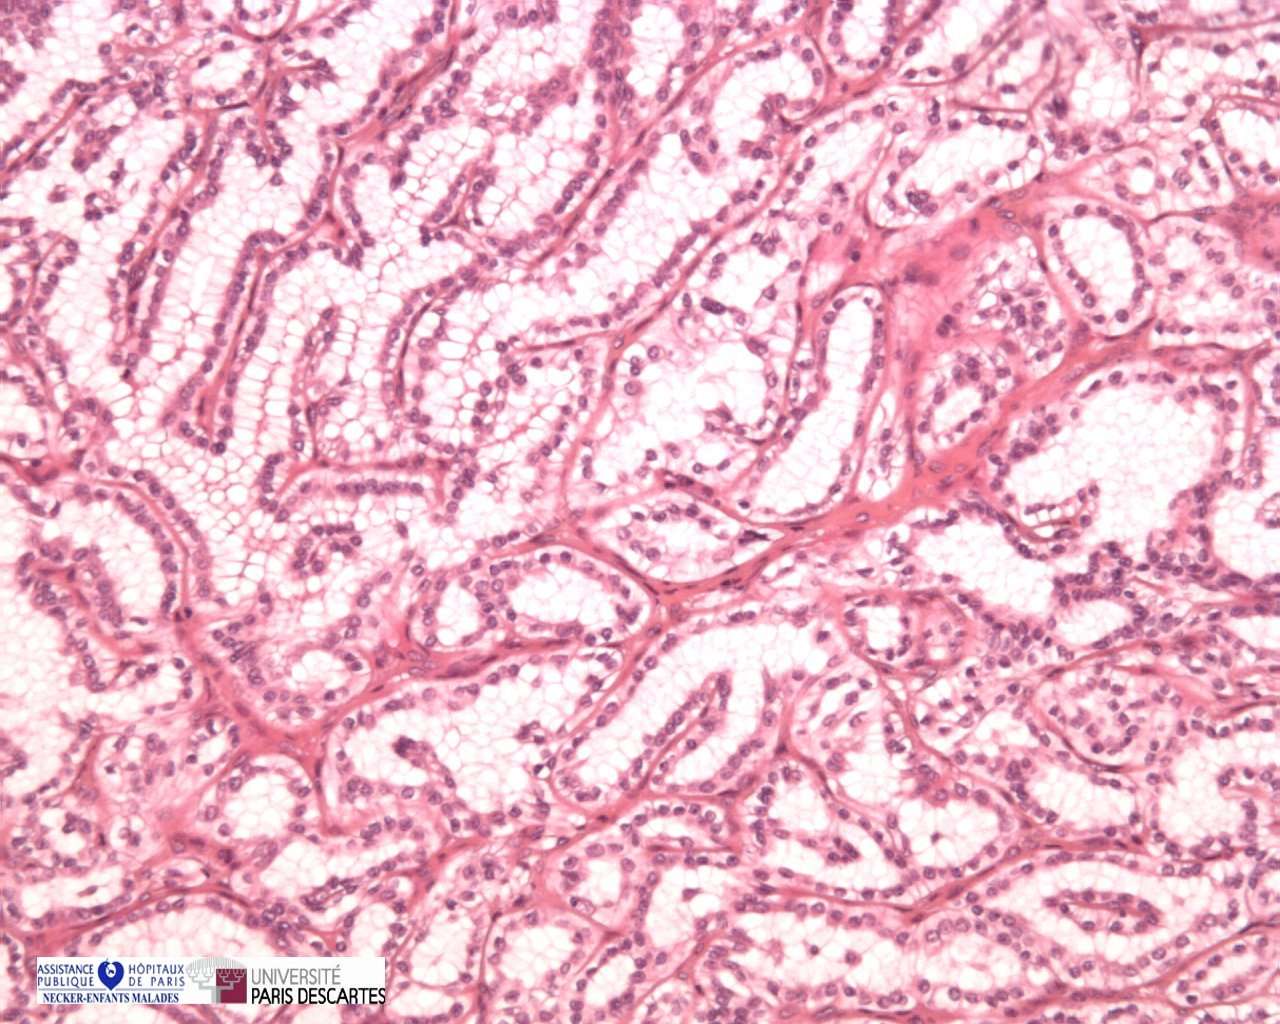 clear cell papillary renal cell carcinoma